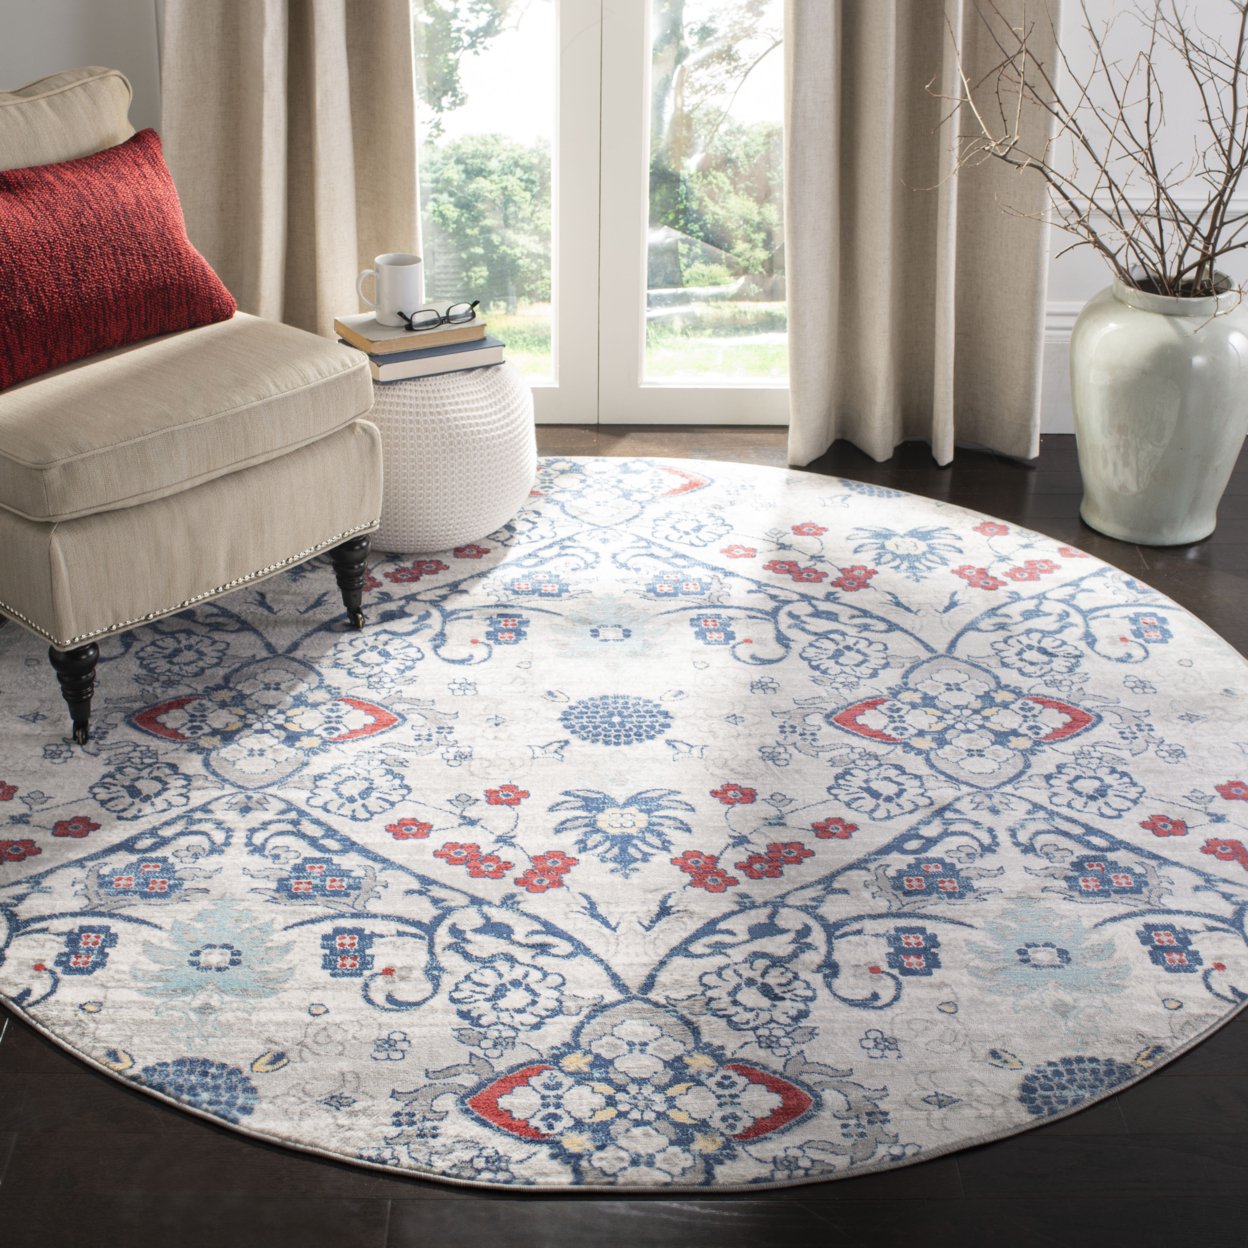 SAFAVIEH Brentwood Collection BNT894M Navy / Grey Rug - 2' X 12'